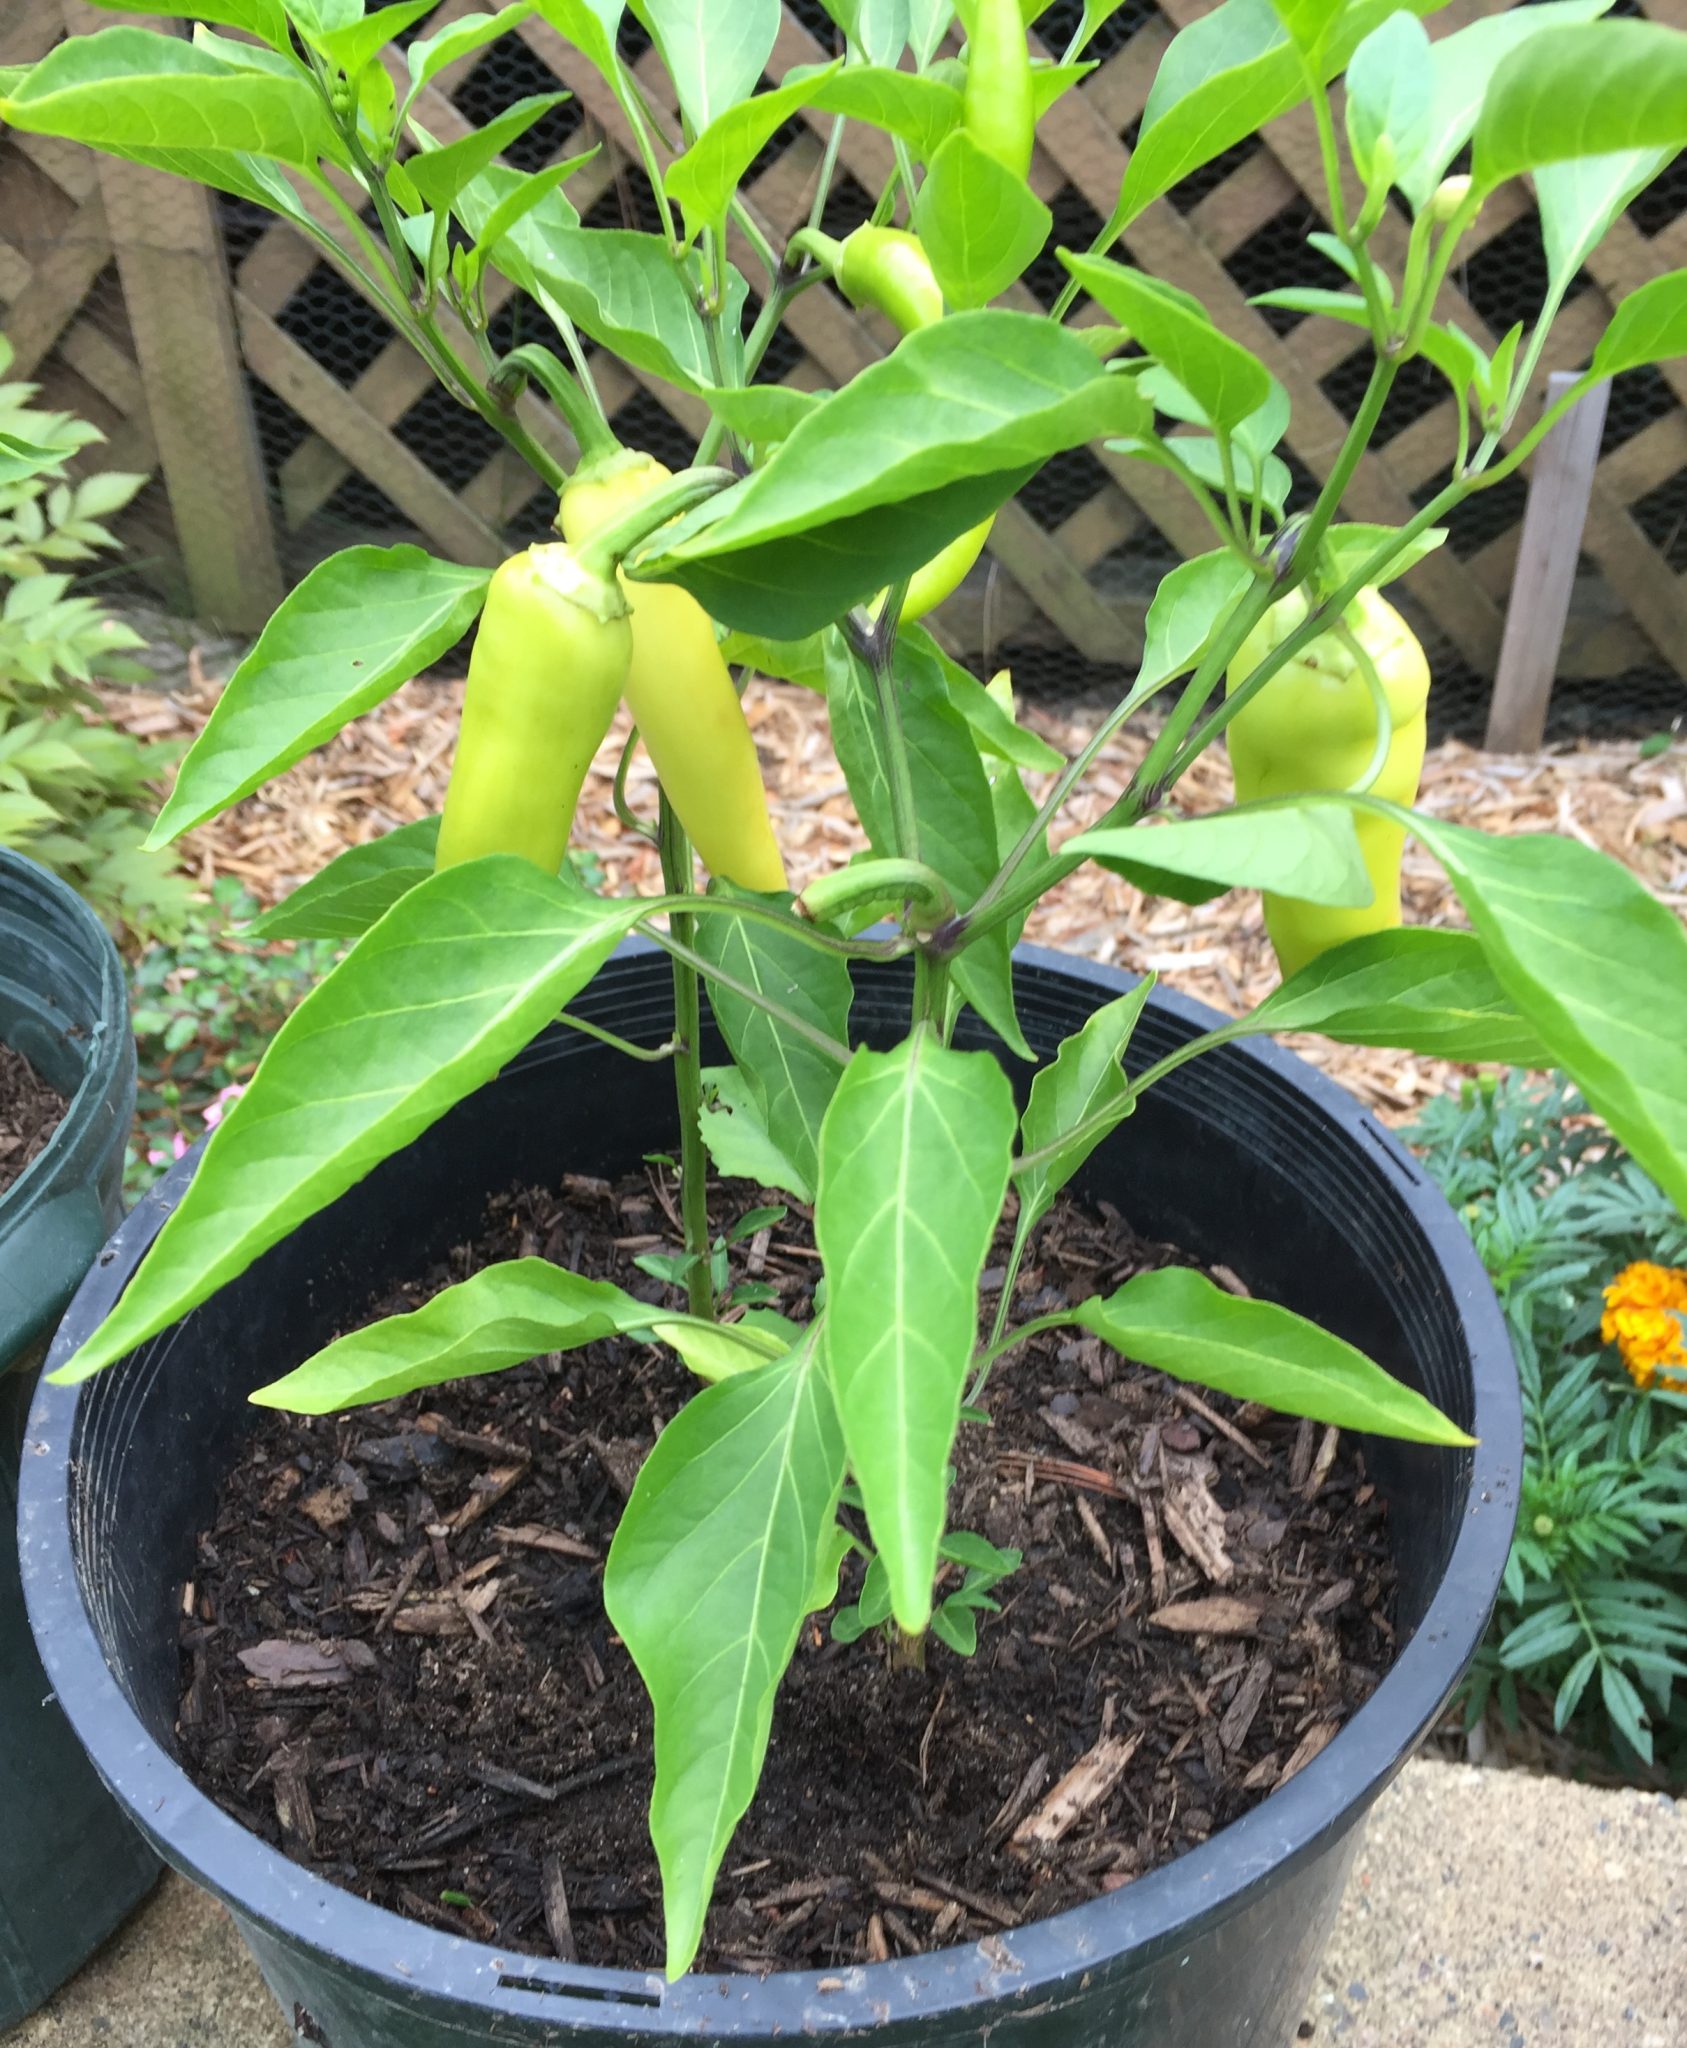 A potted hot chili plant